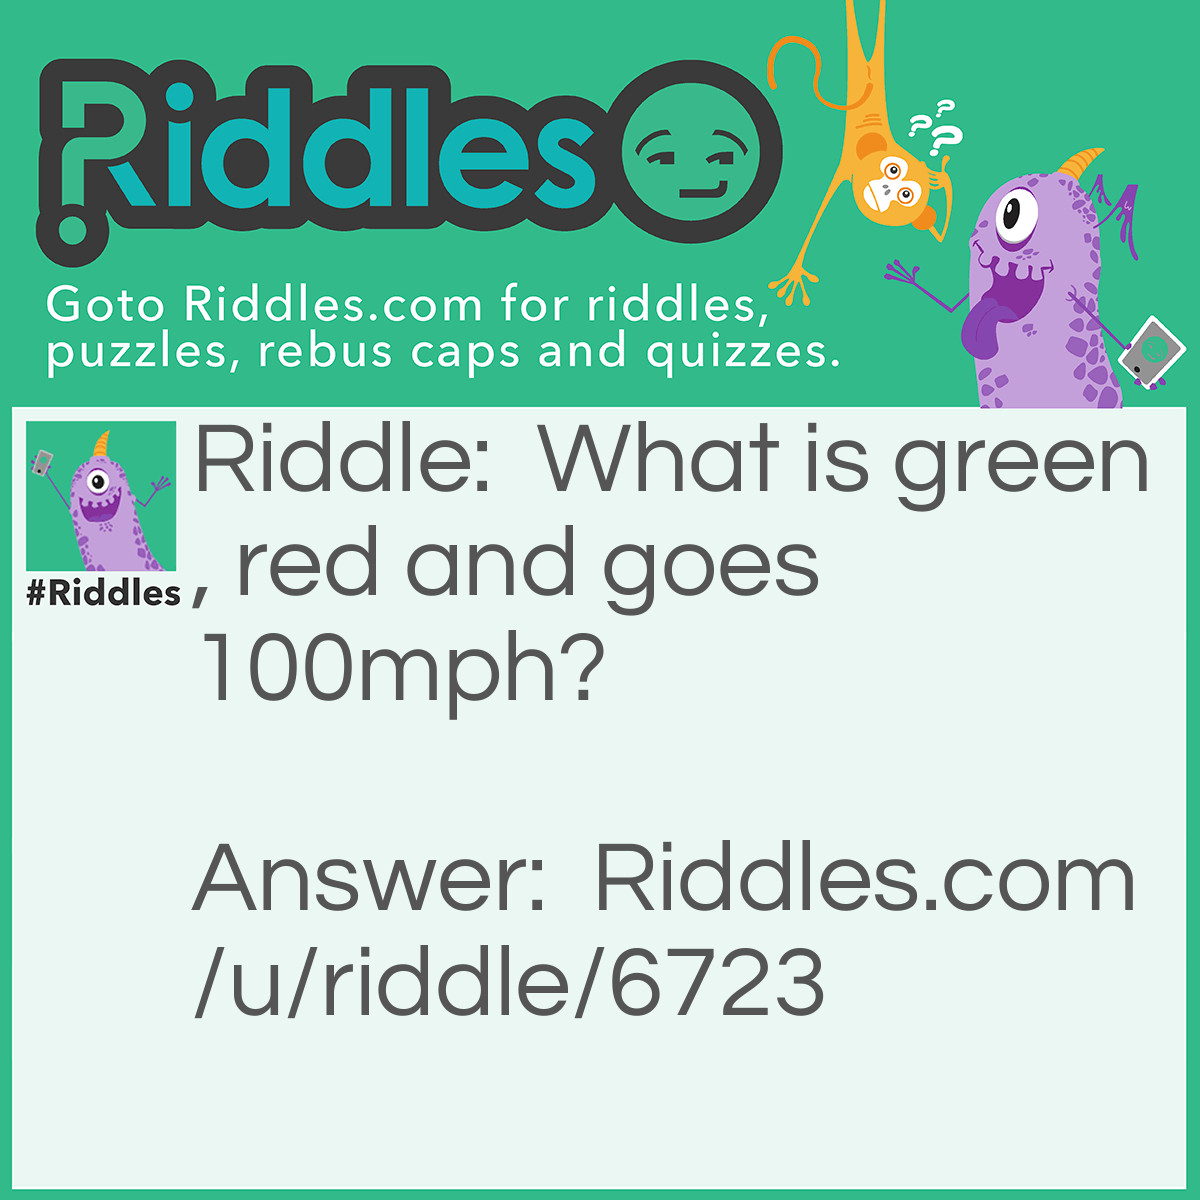 Riddle: What is green, red and goes 100mph? Answer: A frog in a blender.